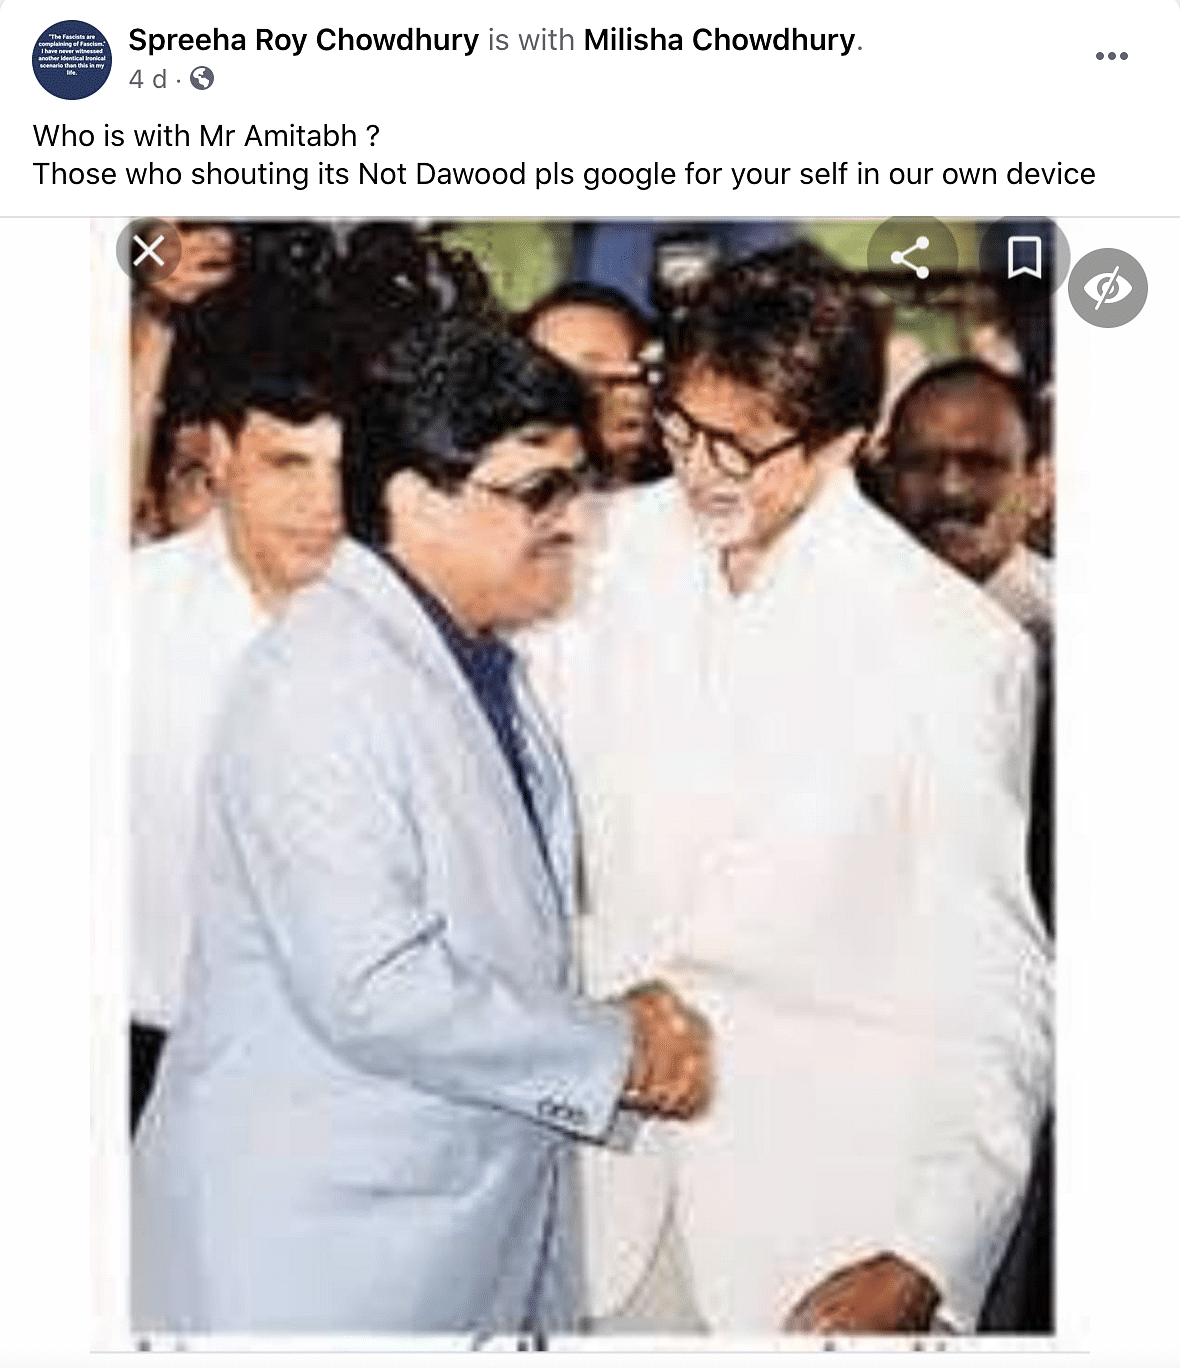 The photograph is nearly a decade old when Amitabh Bachchan met then Chief Minister of Maharashtra Ashok Chavan.